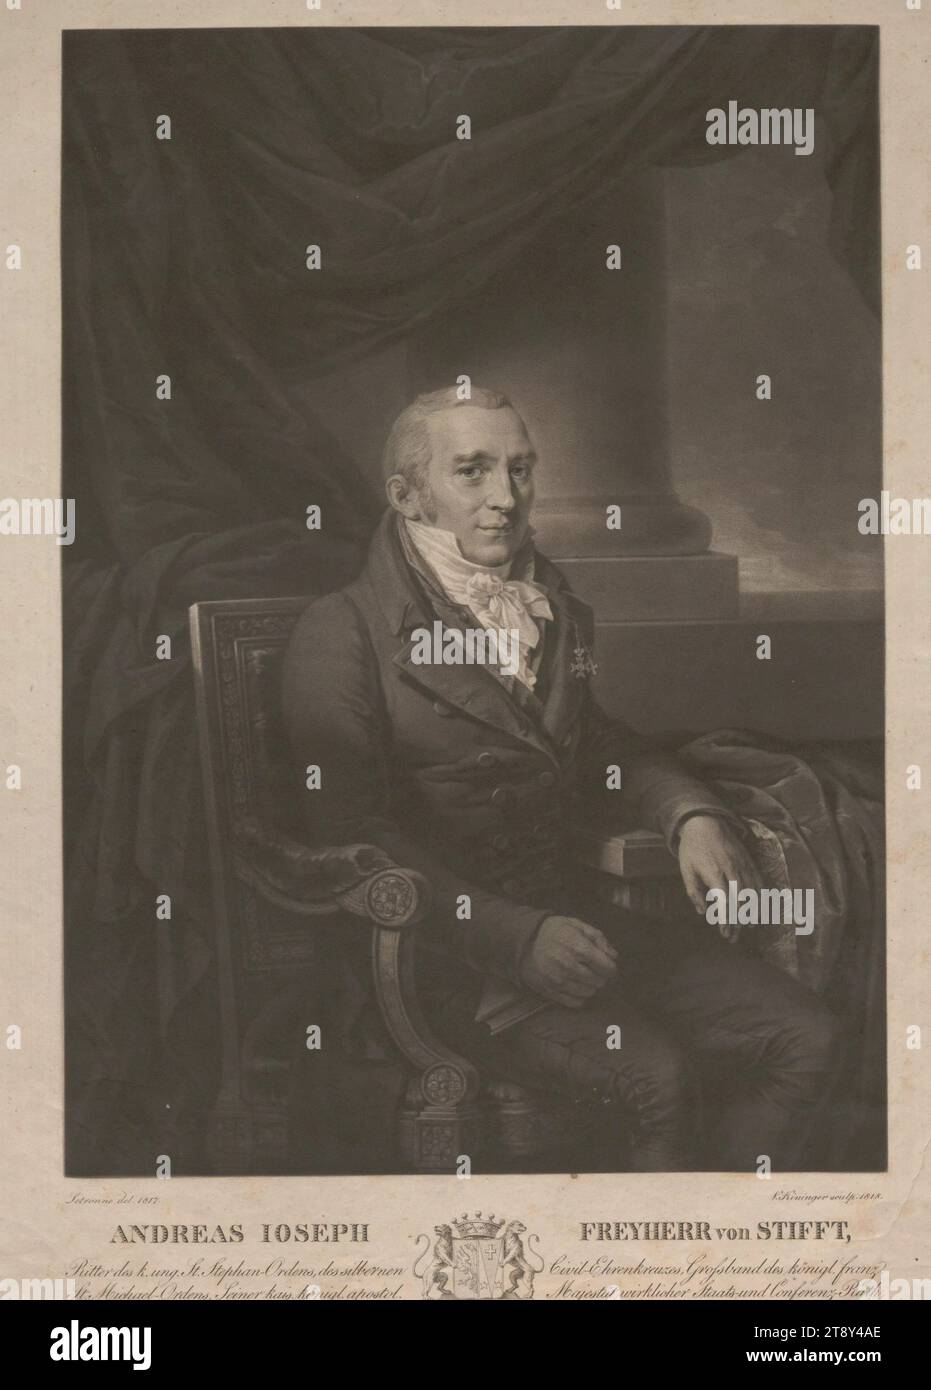 ANDREAS IOSEPH FREYHERR von STIFFT, Knight of the k. ung. Order of St. Stephen, the Silver Cross of Civil Honor, Grand Ribbon of the Royal French Order of St. Stephen. St. (...)', Vinzenz Georg Kininger (1767-1851), mezzotint artist, 1818, paper, mezzotint, height 42 cm, width 31, 2 cm, plate size 41, 8×28, 7 cm, inscription, 'Letronne del. 1817.', 'V. Kininger sculp. 1818.', Fine Arts, Health Care, Estate Constantin von Wurzbach, portrait, man, physician, doctor., The Vienna Collection Stock Photo